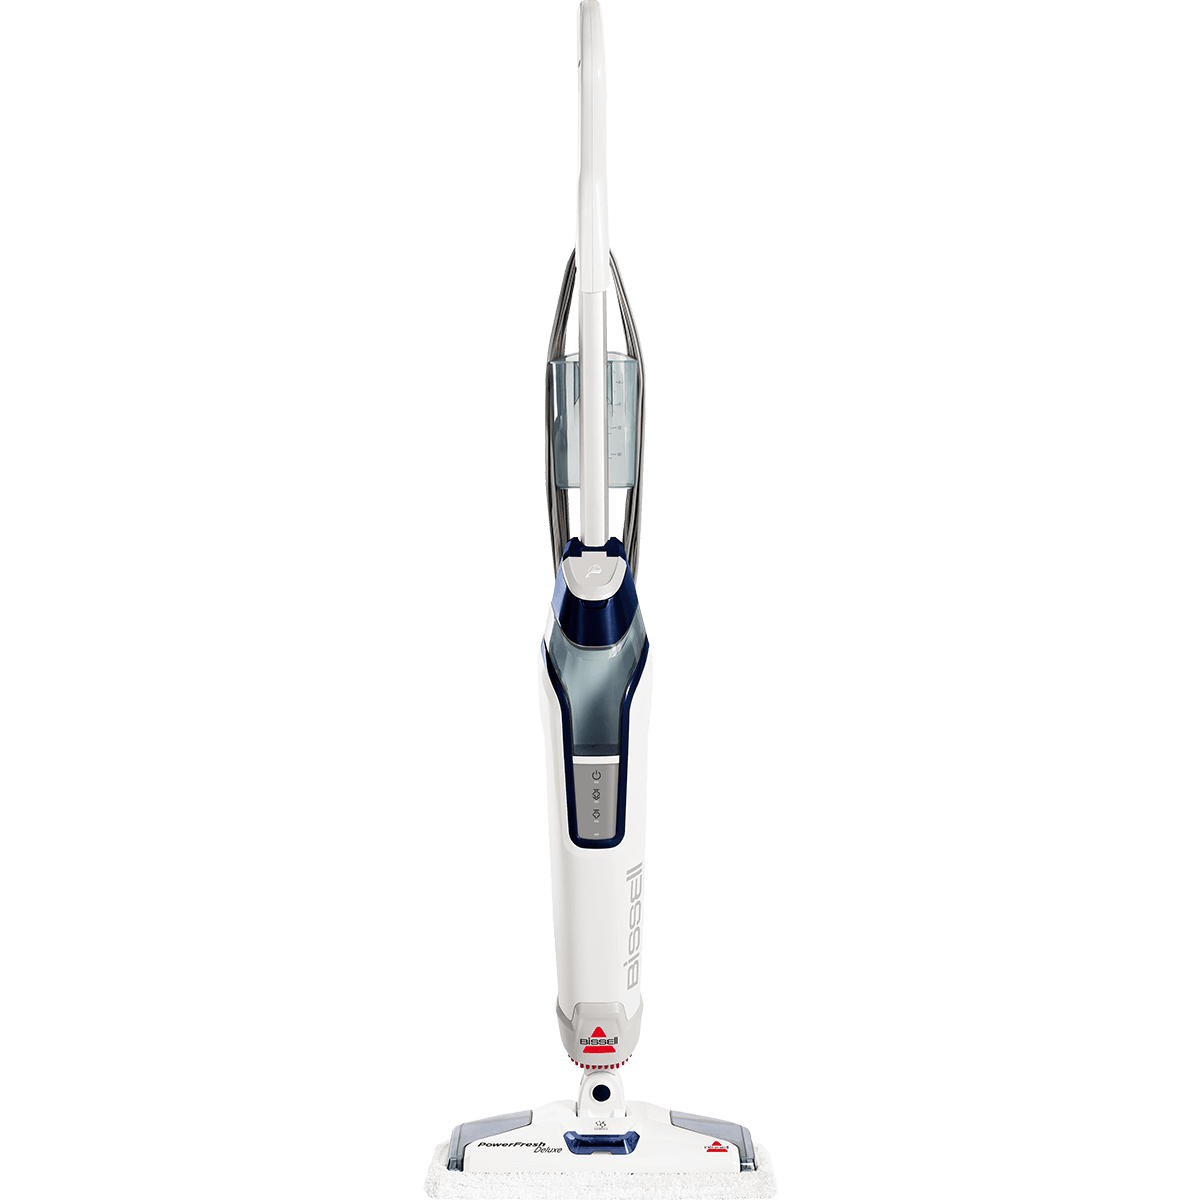 https://s3-assets.sylvane.com/media/images/products/bissell-1806-powerfresh-steam-mop-main.png